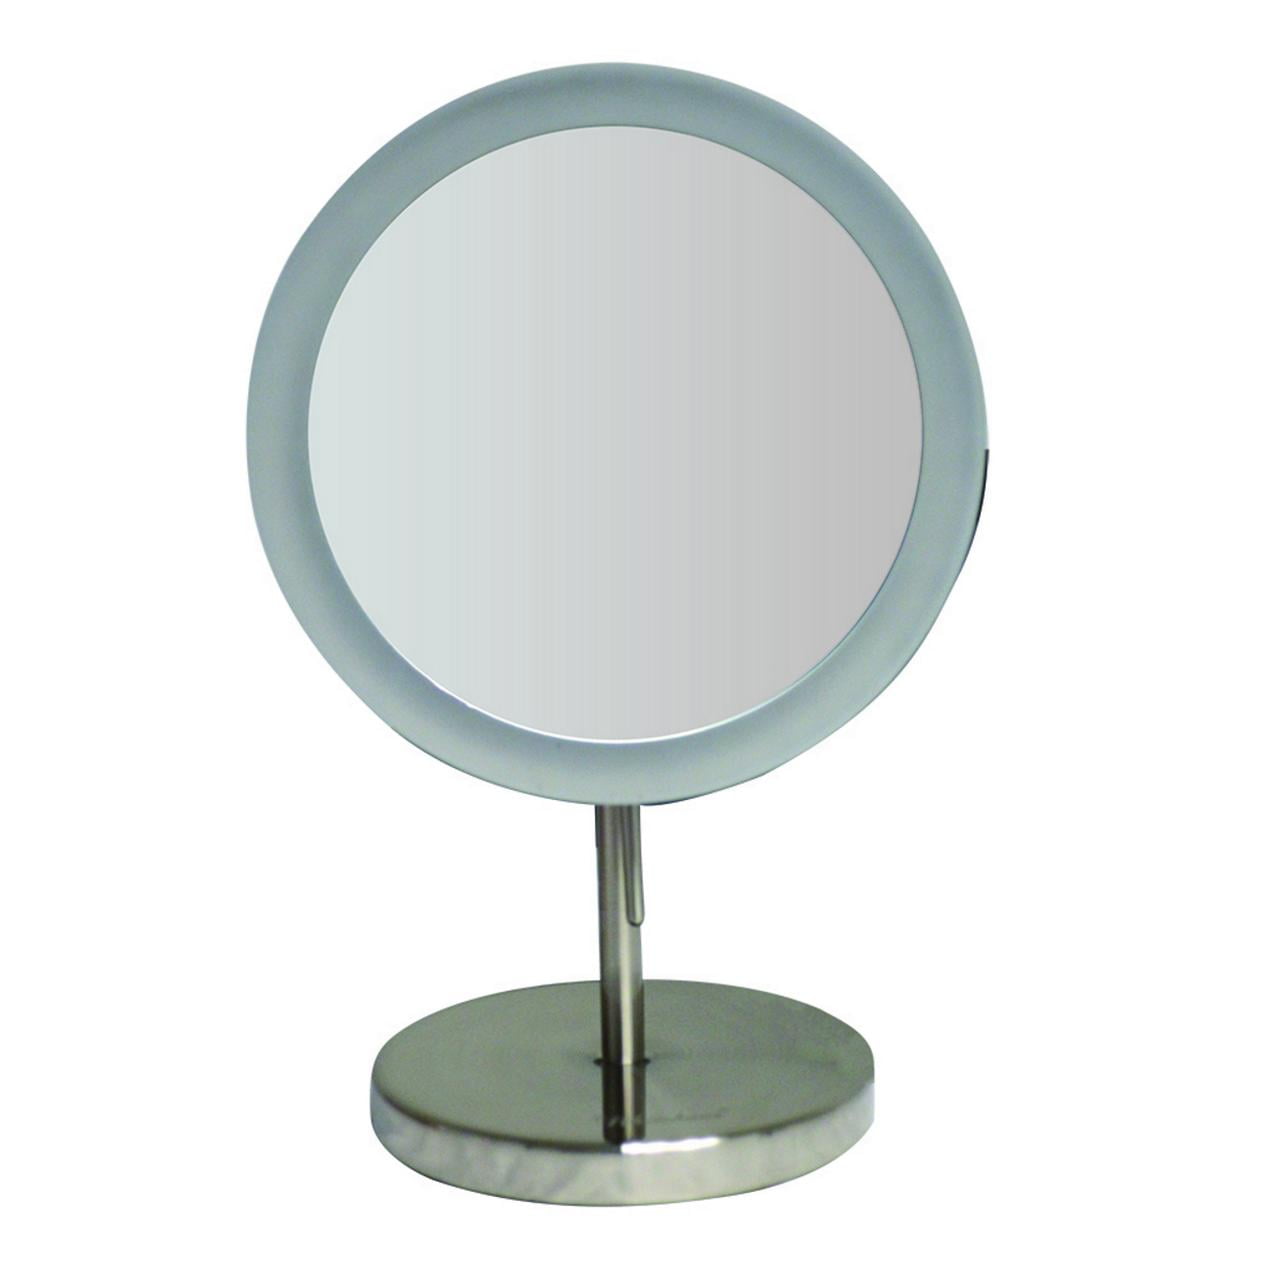 Whmr106-bn Round Freestanding Led 5x Magnified Mirror - Brushed Nickel